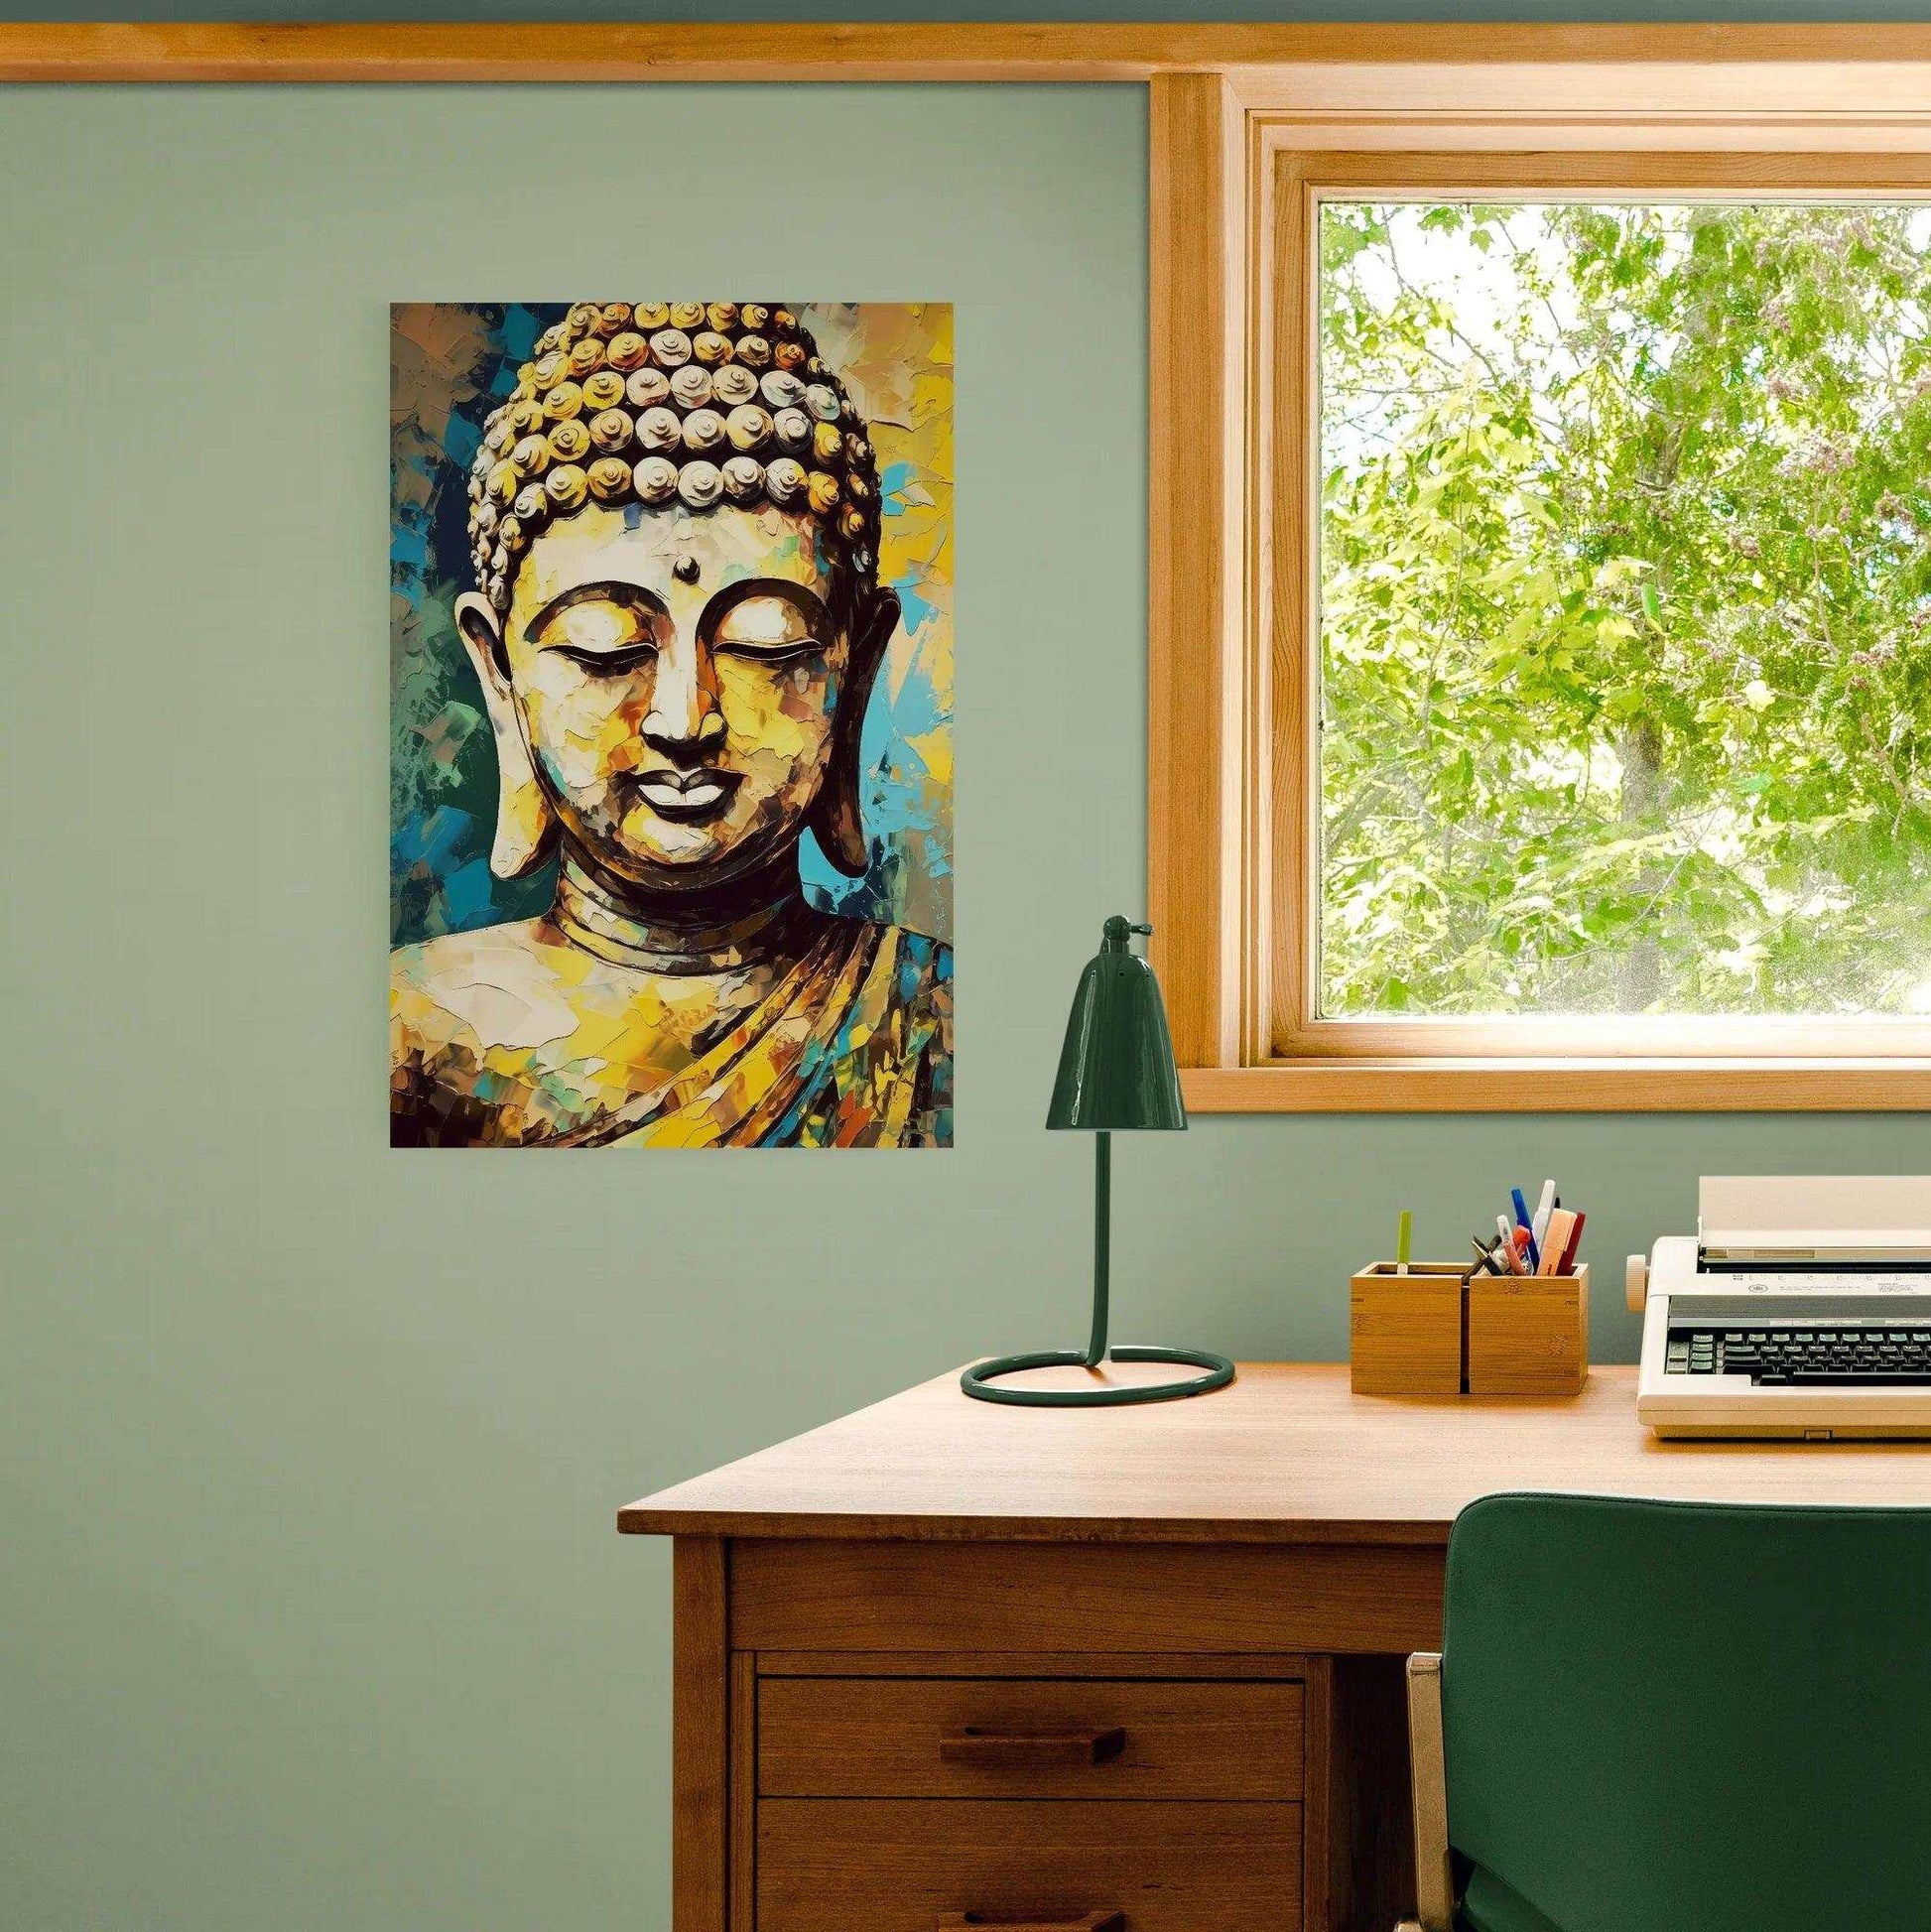 Colorful Buddha artwork displayed on a sage green wall beside a window with a view of lush greenery, over a wooden desk with a green lamp, stationery holder, and a vintage typewriter.